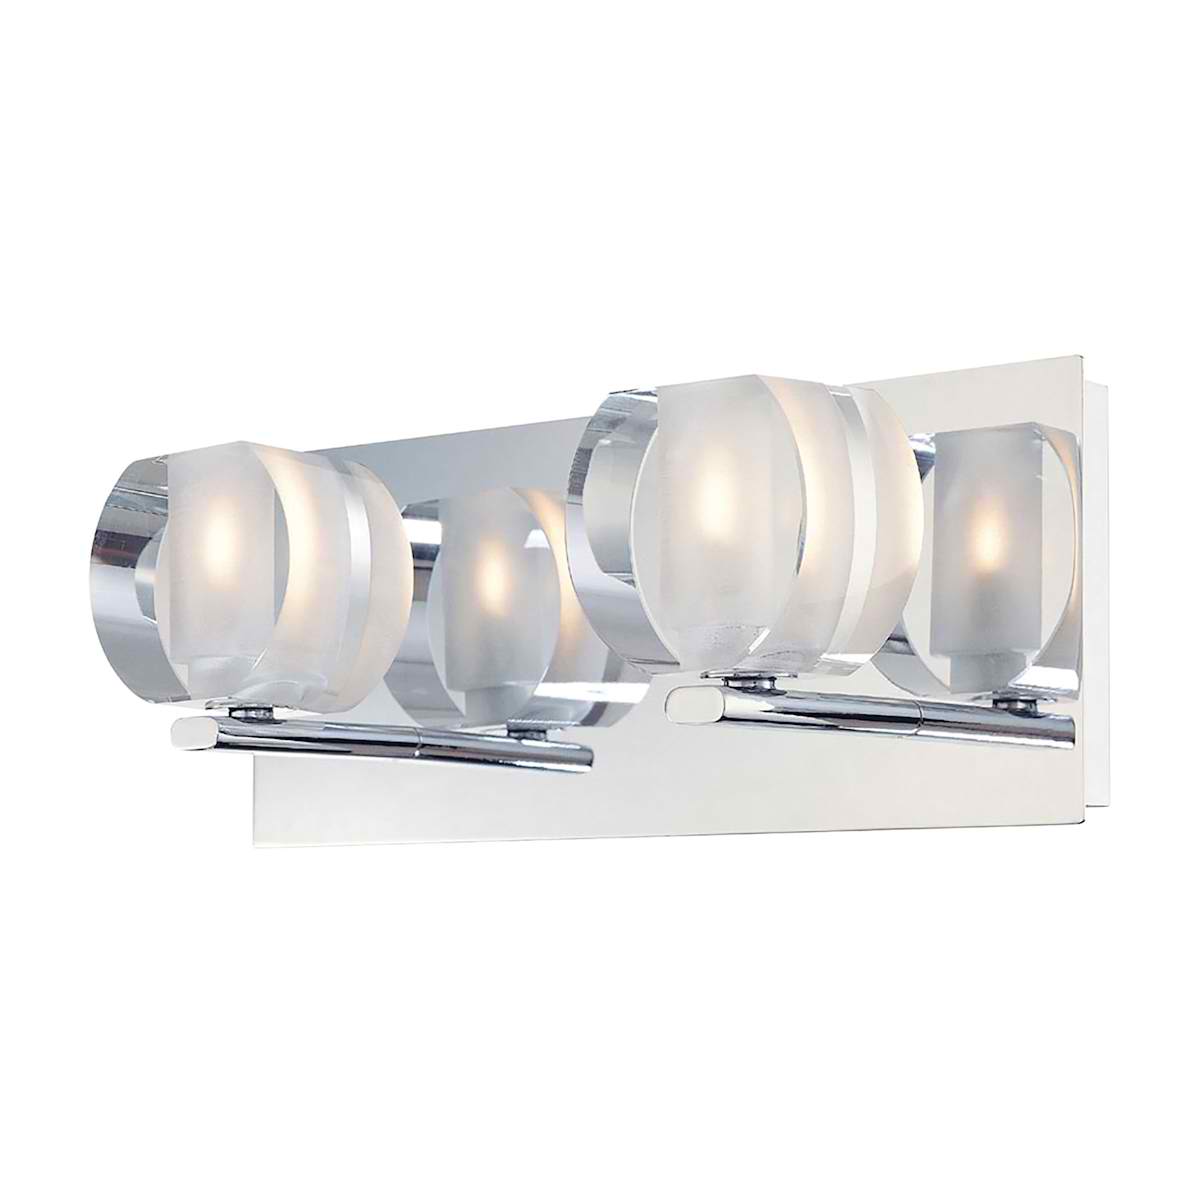 Circo Double Lamp with Rounded Inside Frosted Crystal Glass / Chrome Finish